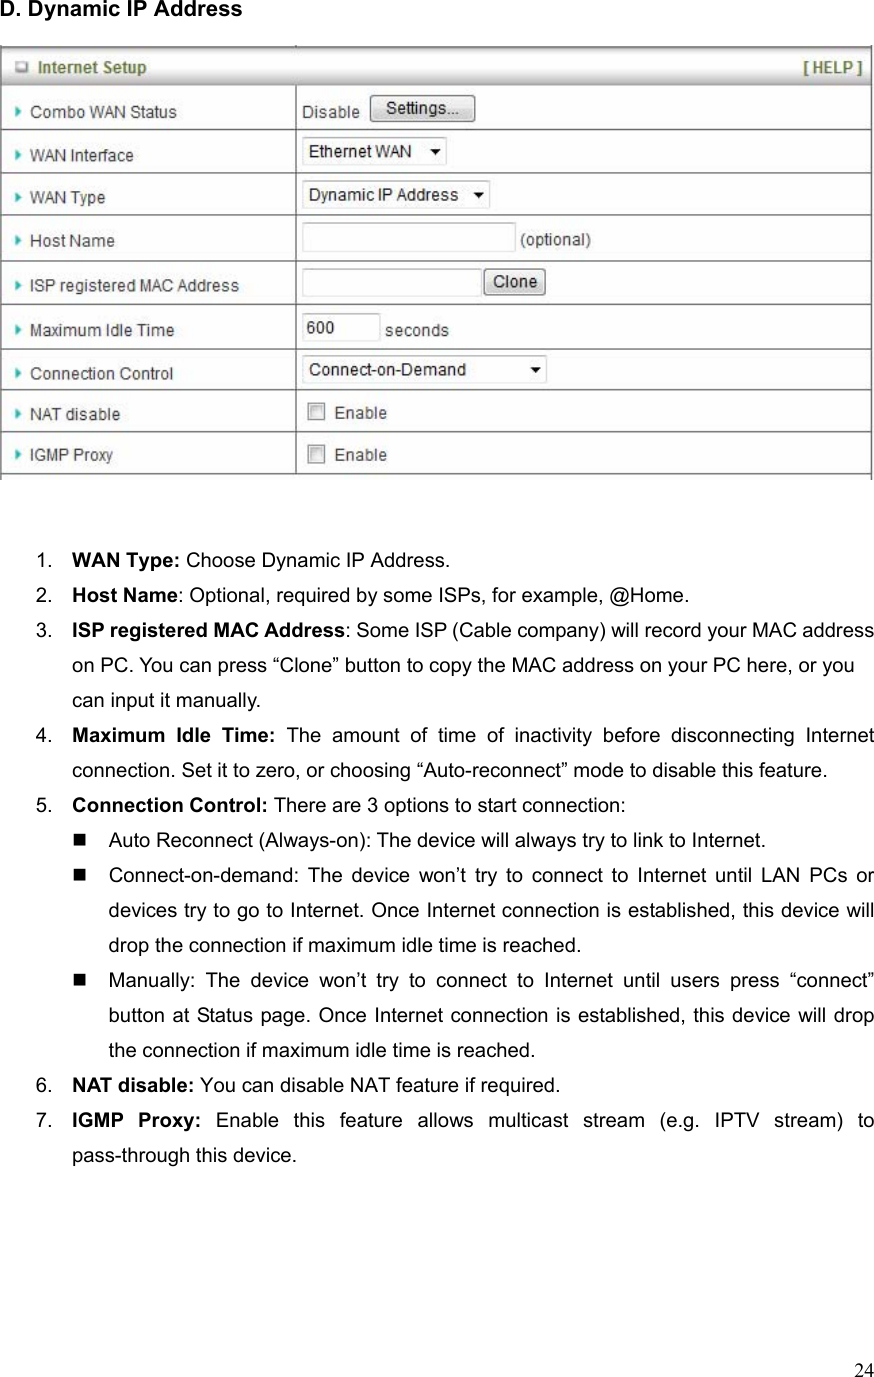  24D. Dynamic IP Address      1.  WAN Type: Choose Dynamic IP Address. 2.  Host Name: Optional, required by some ISPs, for example, @Home. 3.  ISP registered MAC Address: Some ISP (Cable company) will record your MAC address on PC. You can press “Clone” button to copy the MAC address on your PC here, or you can input it manually. 4.  Maximum Idle Time: The amount of time of inactivity before disconnecting Internet connection. Set it to zero, or choosing “Auto-reconnect” mode to disable this feature.   5.  Connection Control: There are 3 options to start connection:     Auto Reconnect (Always-on): The device will always try to link to Internet.       Connect-on-demand: The device won’t try to connect to Internet until LAN PCs or devices try to go to Internet. Once Internet connection is established, this device will drop the connection if maximum idle time is reached.   Manually: The device won’t try to connect to Internet until users press “connect” button at Status page. Once Internet connection is established, this device will drop the connection if maximum idle time is reached. 6.  NAT disable: You can disable NAT feature if required. 7.  IGMP Proxy: Enable this feature allows multicast stream (e.g. IPTV stream) to pass-through this device.      